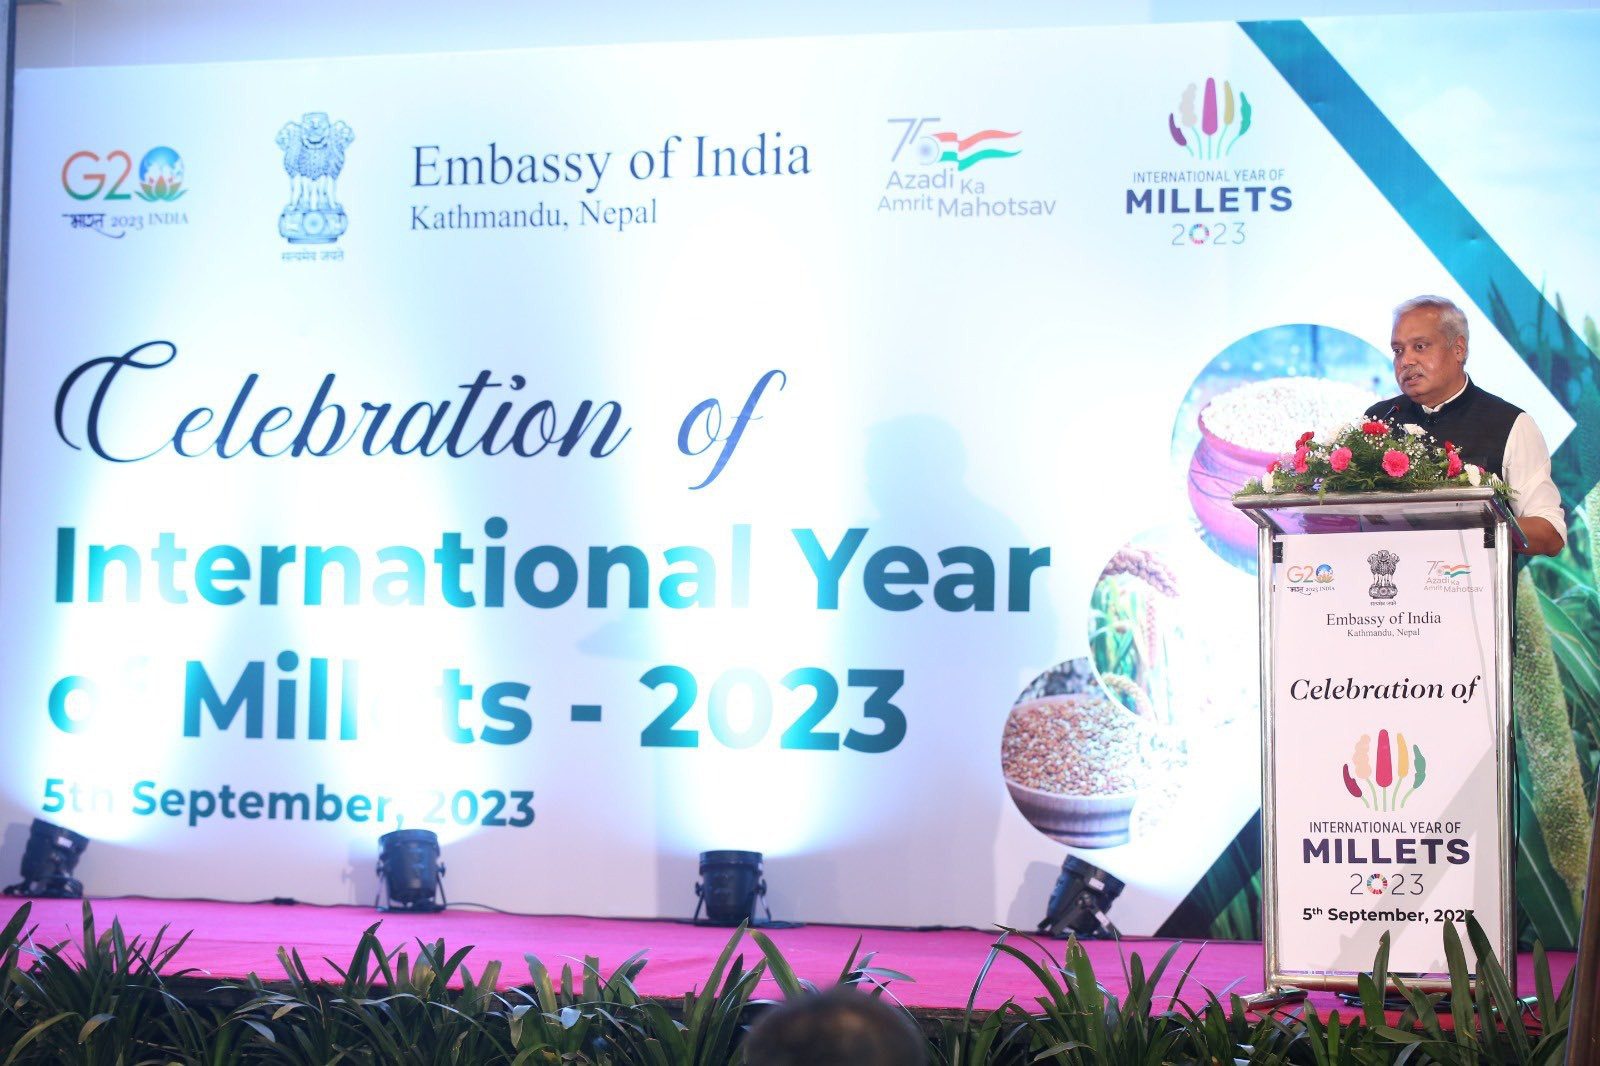 embassy-of-india-in-kathmandu-organized-an-event-to-celebrate-international-year-of-millets